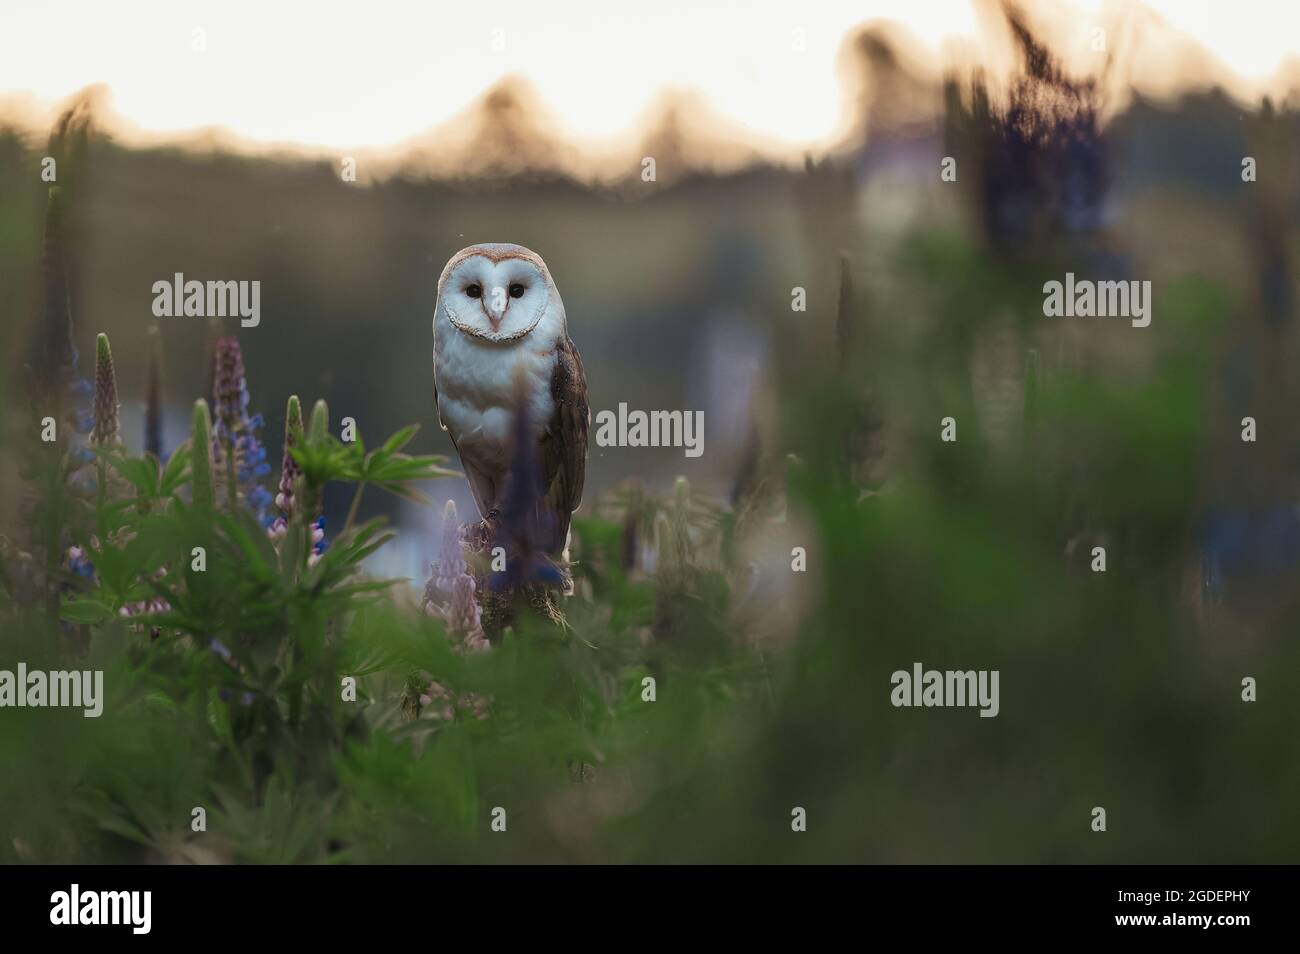 The barn owl (These albums) in a meadow at sunrise. Sitting on a stick in the grass among the blue flowers. Spring atmosphere, golden sunlight. Stock Photo